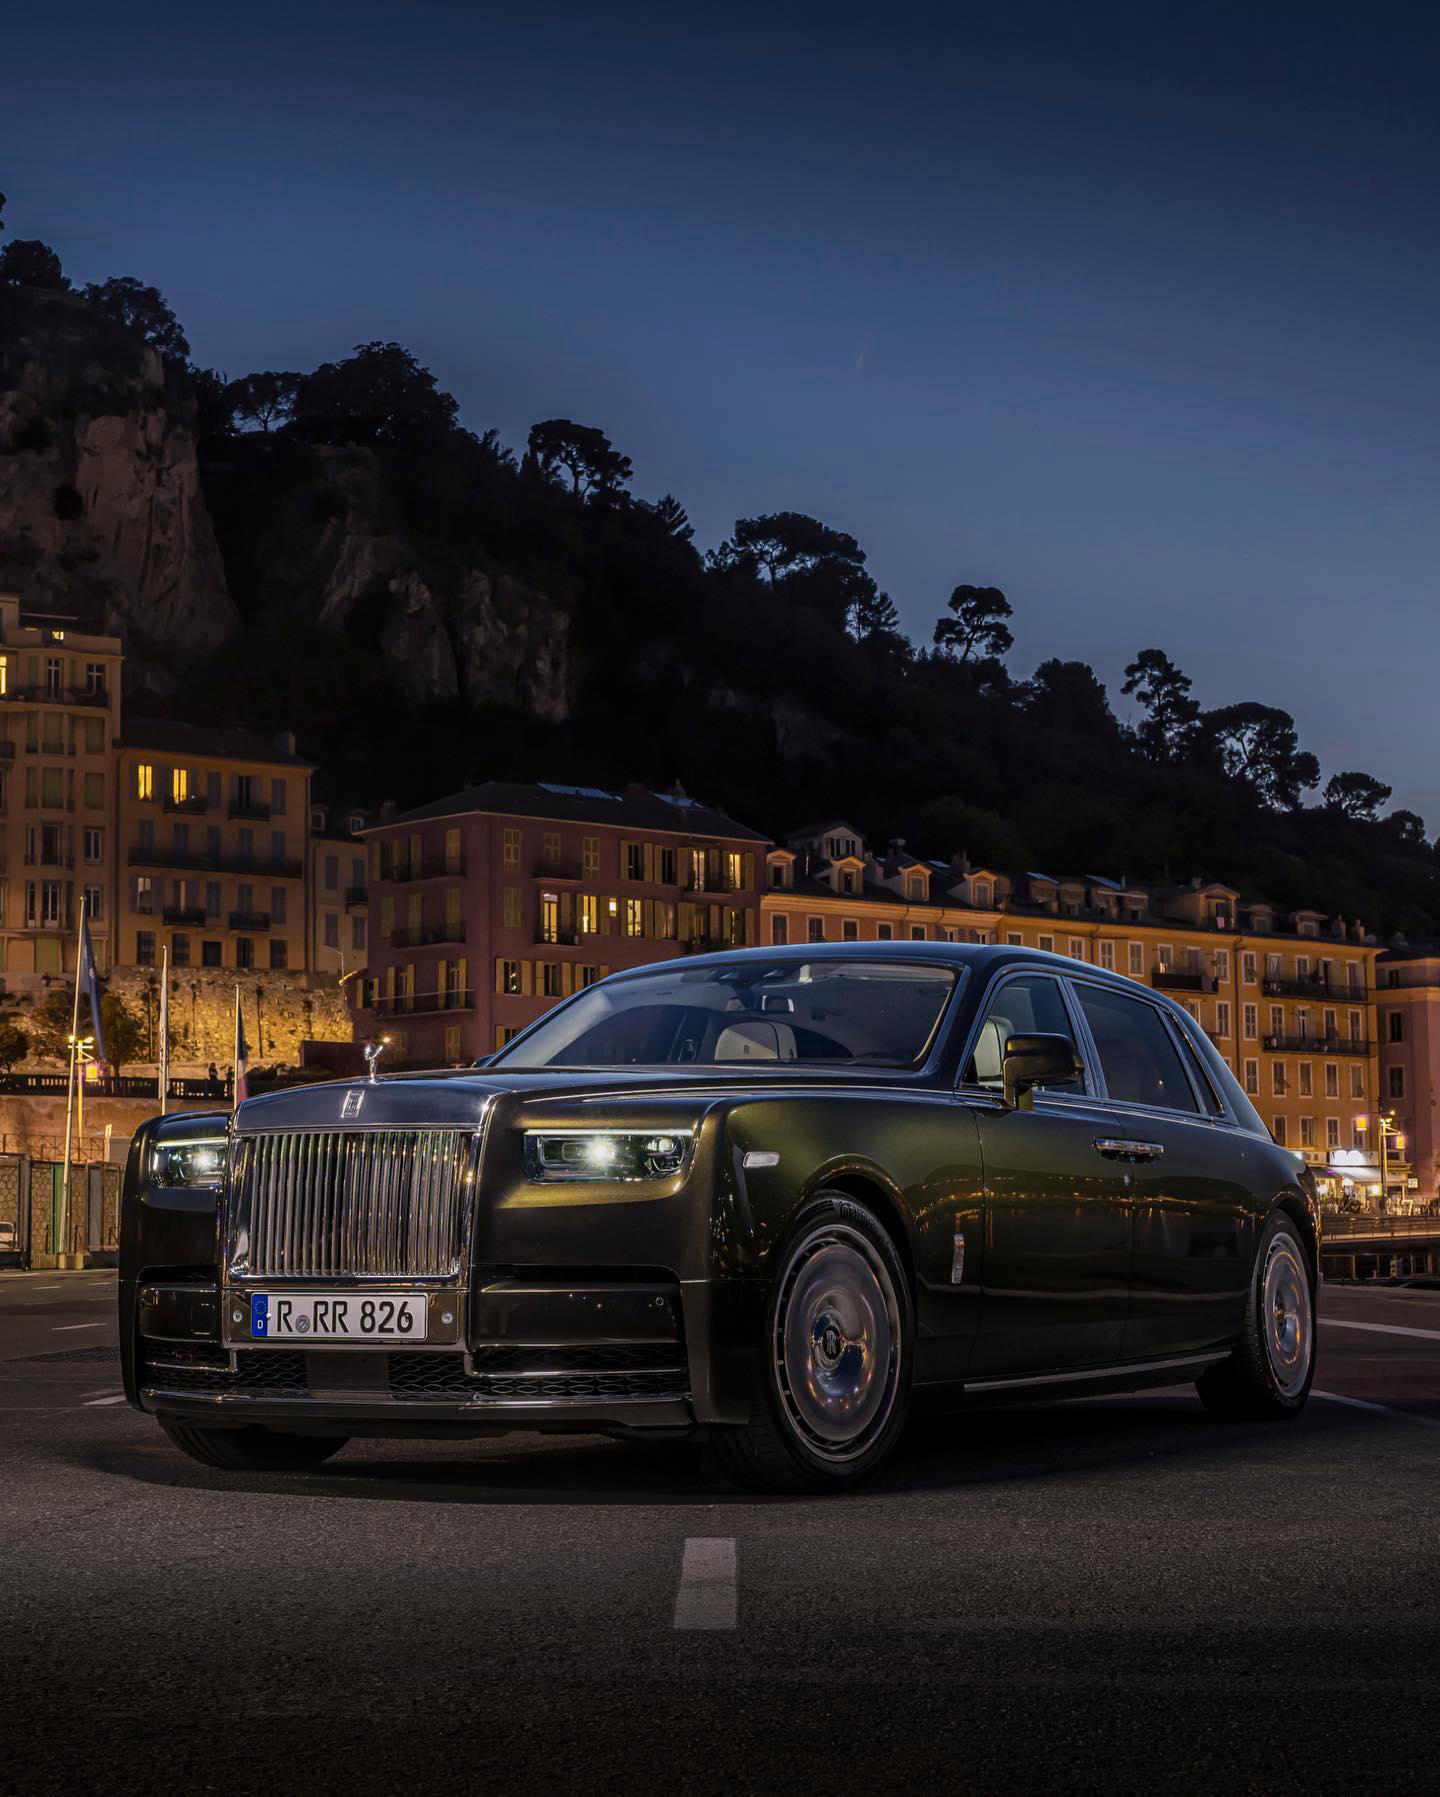 image  1 Rolls-Royce Motor Cars - The French Riviera's enchanting evening light captures the tranquil essence